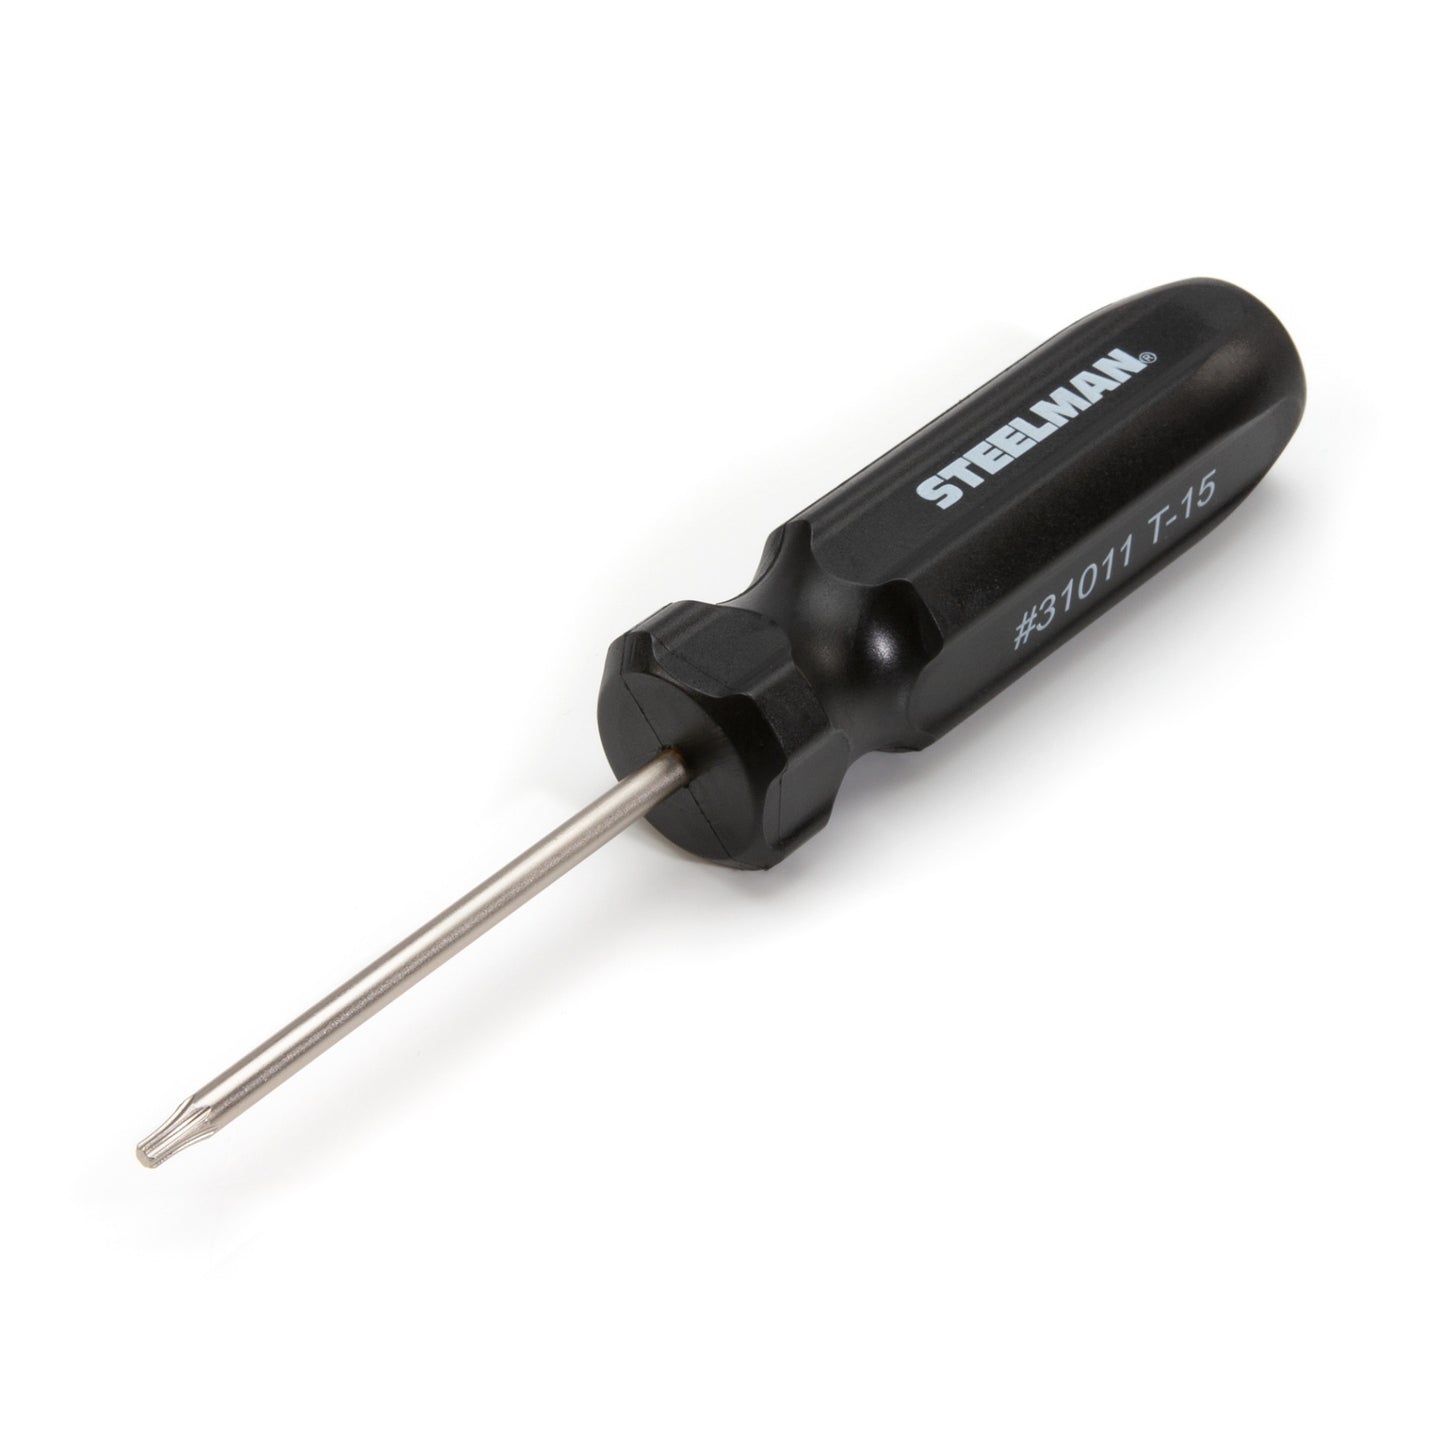 T15 x 3-inch Star Tip Screwdriver with Fluted Handle